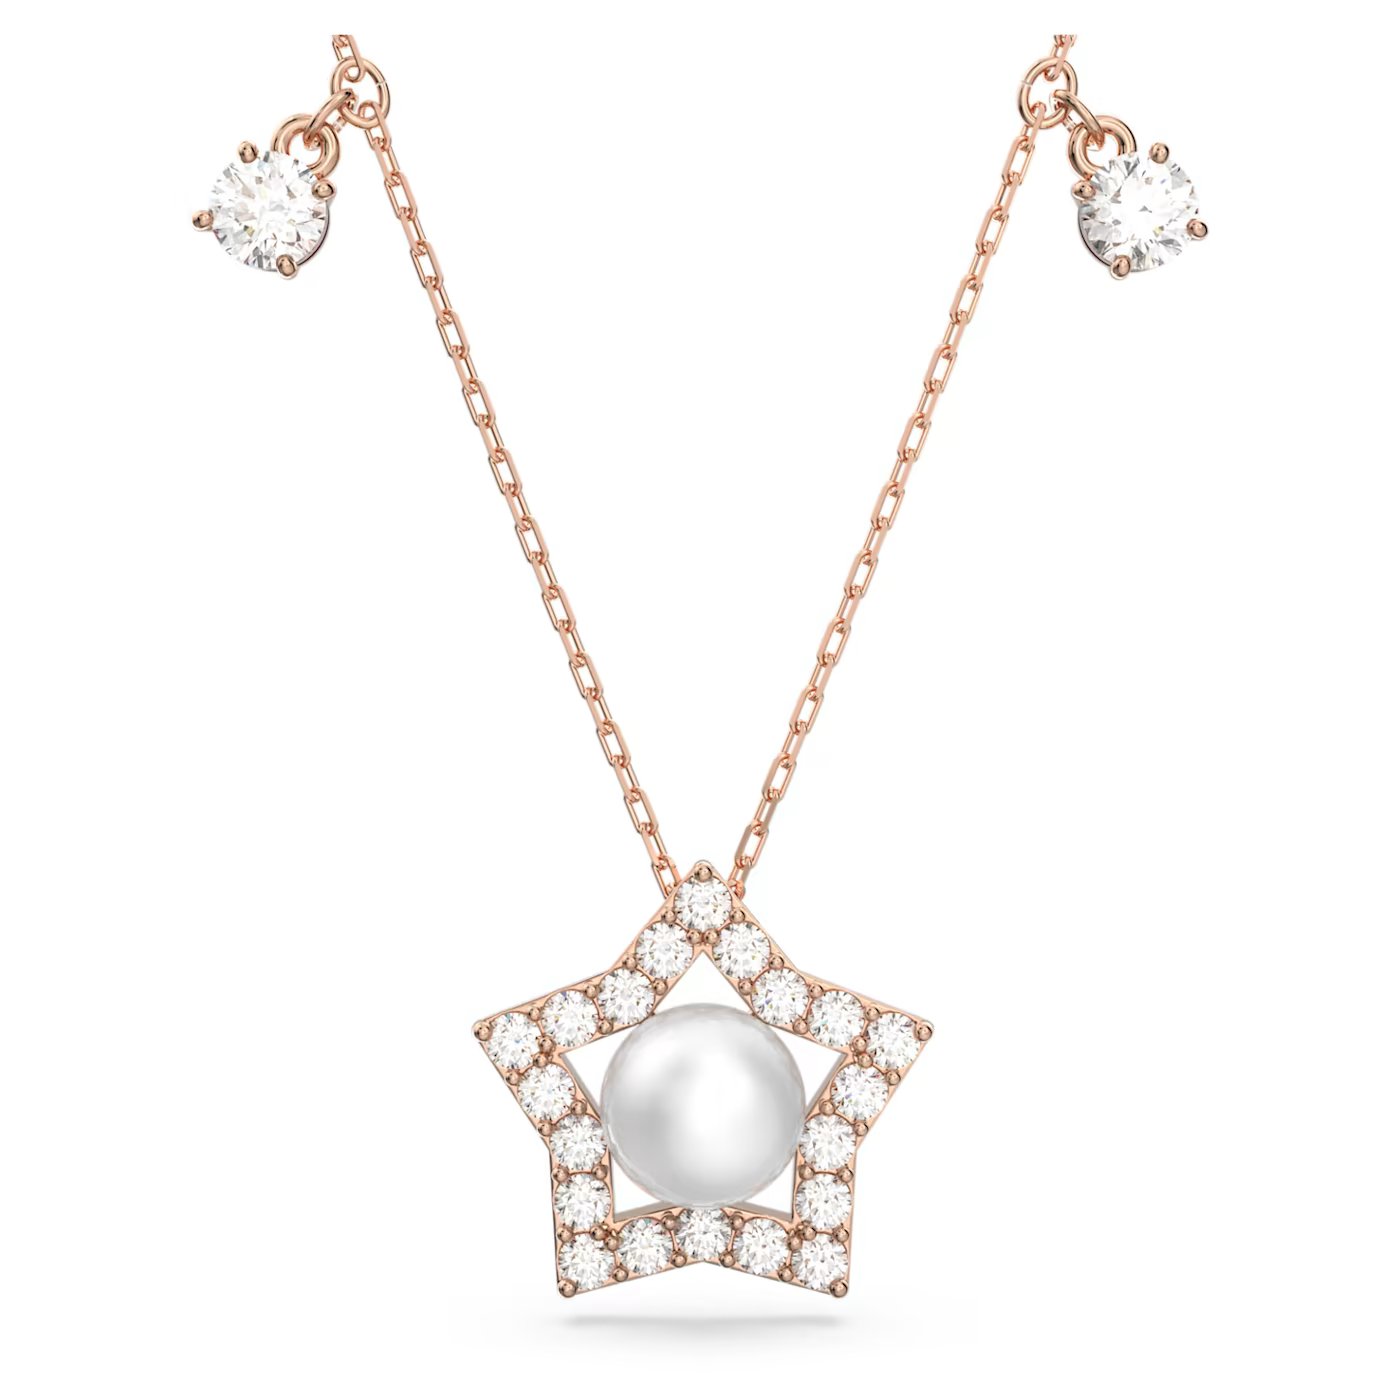 63329ac5dcc90_px-stella-necklace--mixed-round-cuts--star--white--rose-gold-tone-plated-swarovski-5645382.jpg